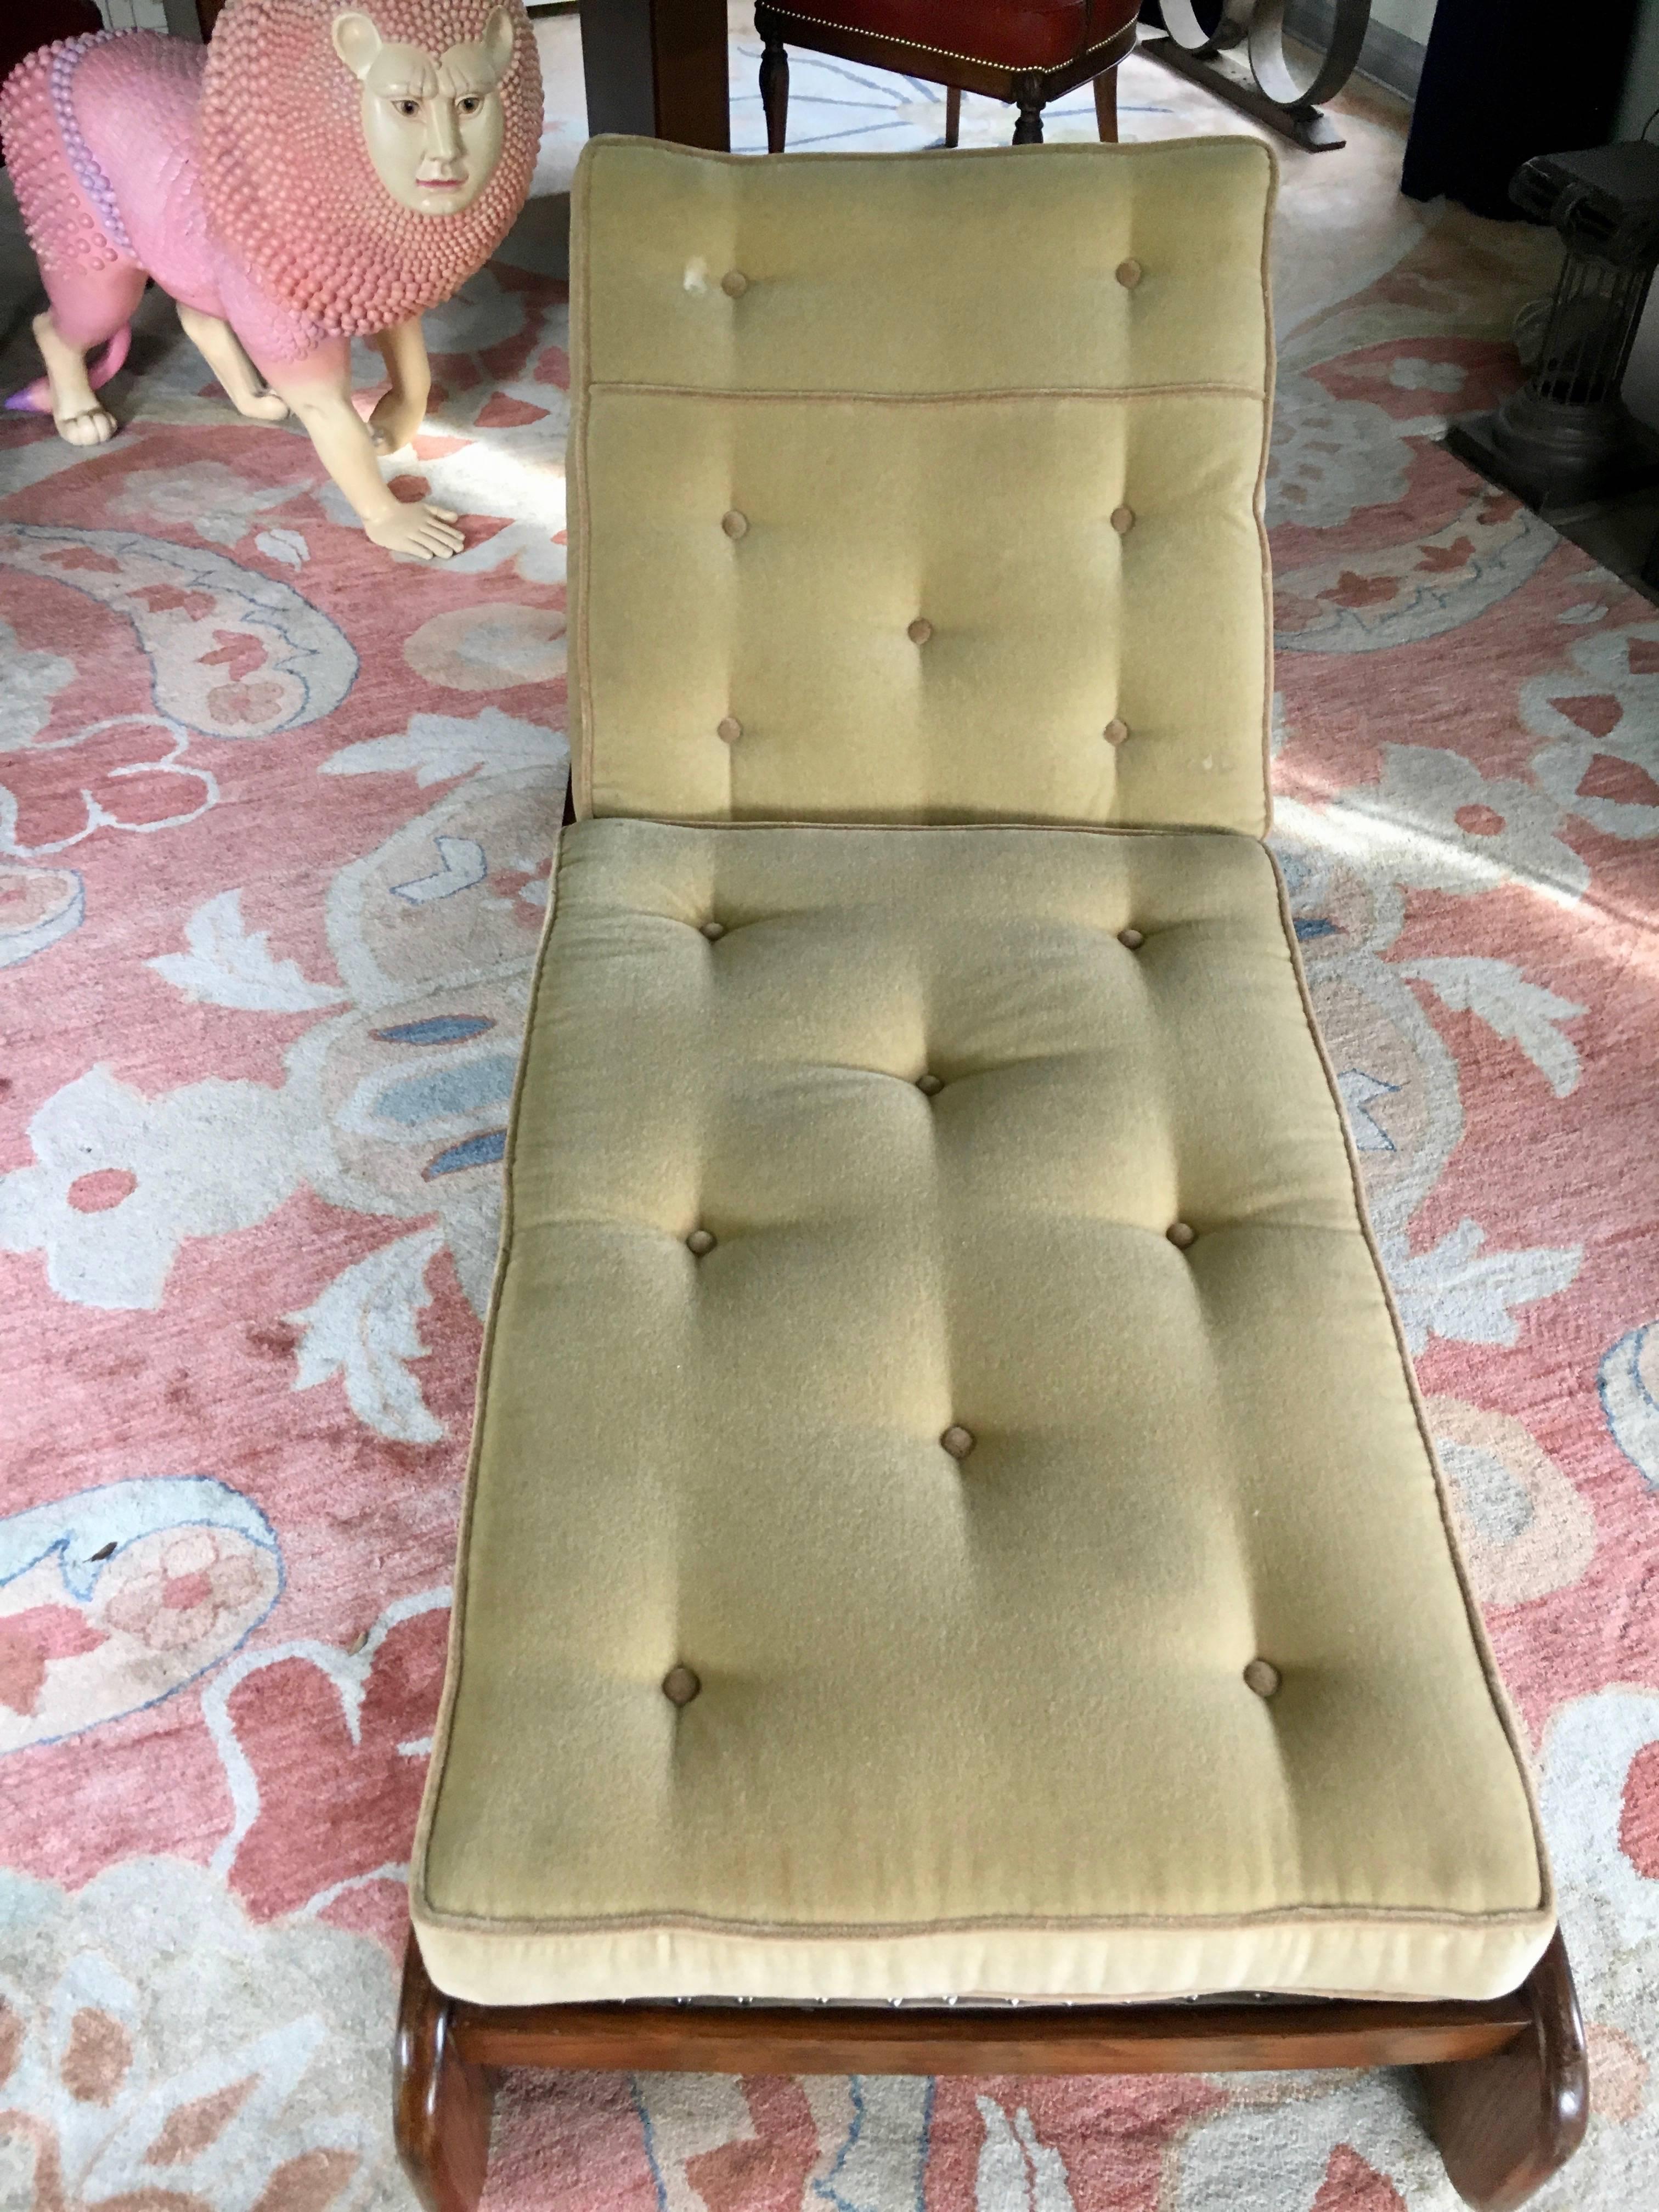 Reclining wooden chaise in mohair - elegant midcentury style wooden chaise, this piece is priced to lower than usual due to some over spray that is on the rear cushion (see images). We are happy to reupholster in COM for an additional fee.

The